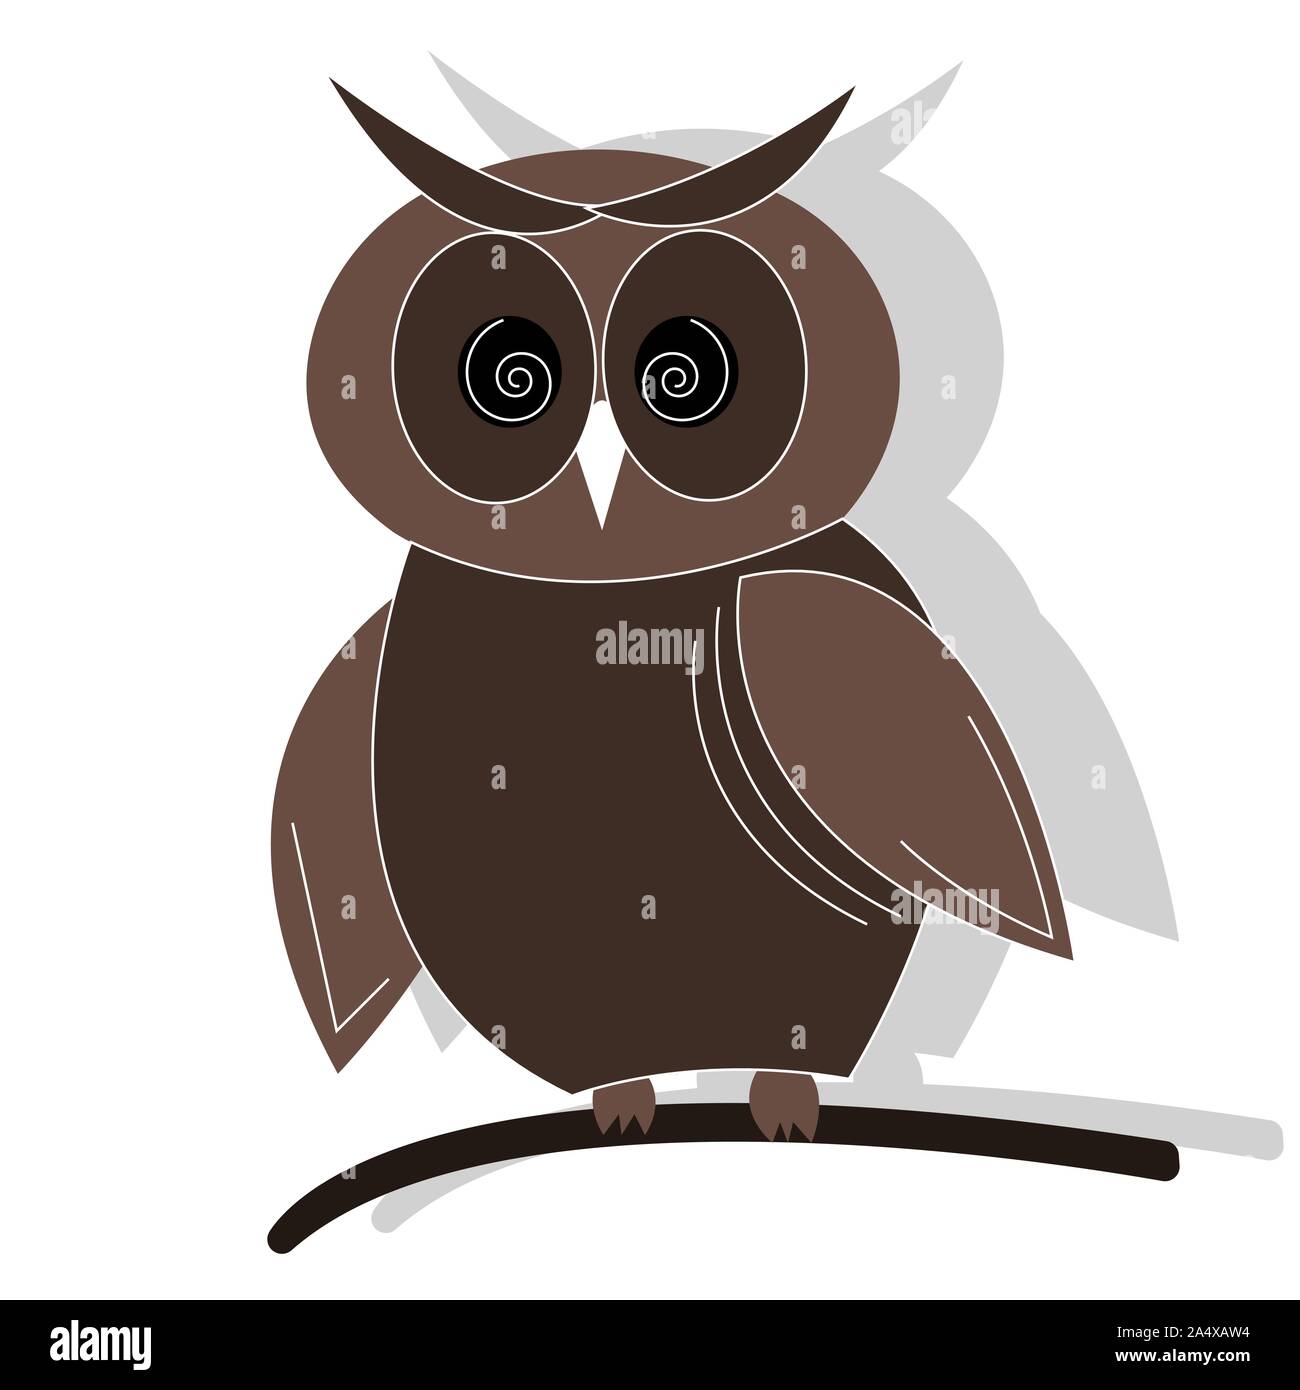 Owl wallpaper Cut Out Stock Images & Pictures - Page 2 - Alamy